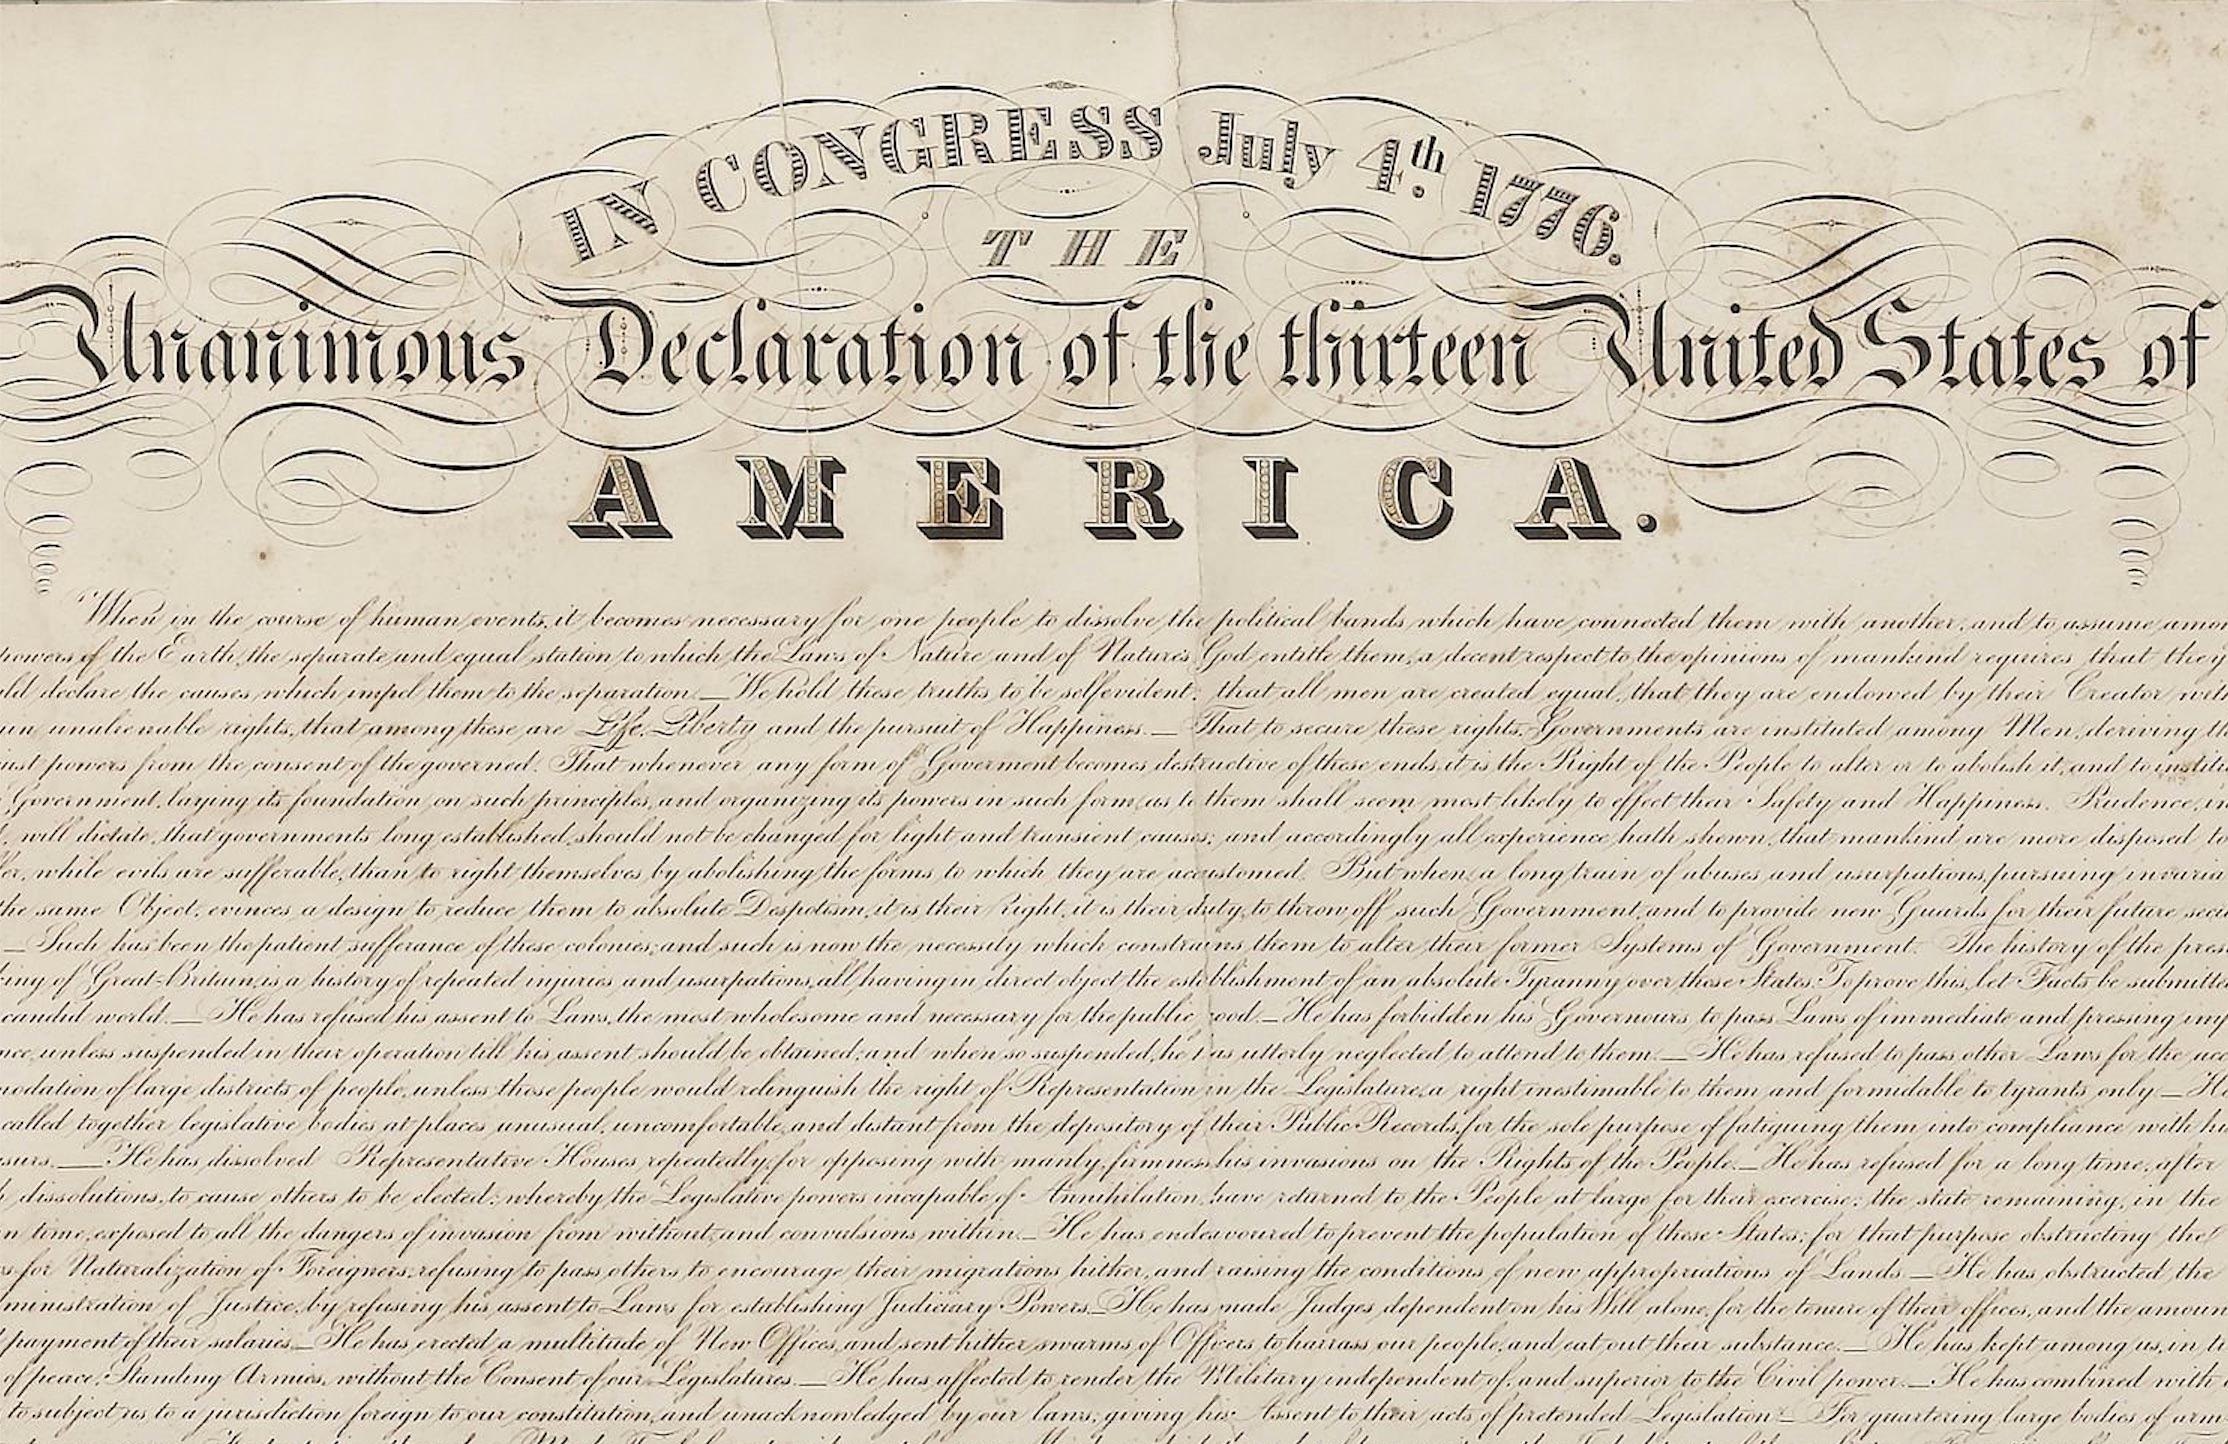 This is an early original broadside printing of the Declaration of Independence by Eleazar Huntington, published in Hartford, Connecticut, circa 1820.

The Declaration of Independence is the foundational document of the United States and has been